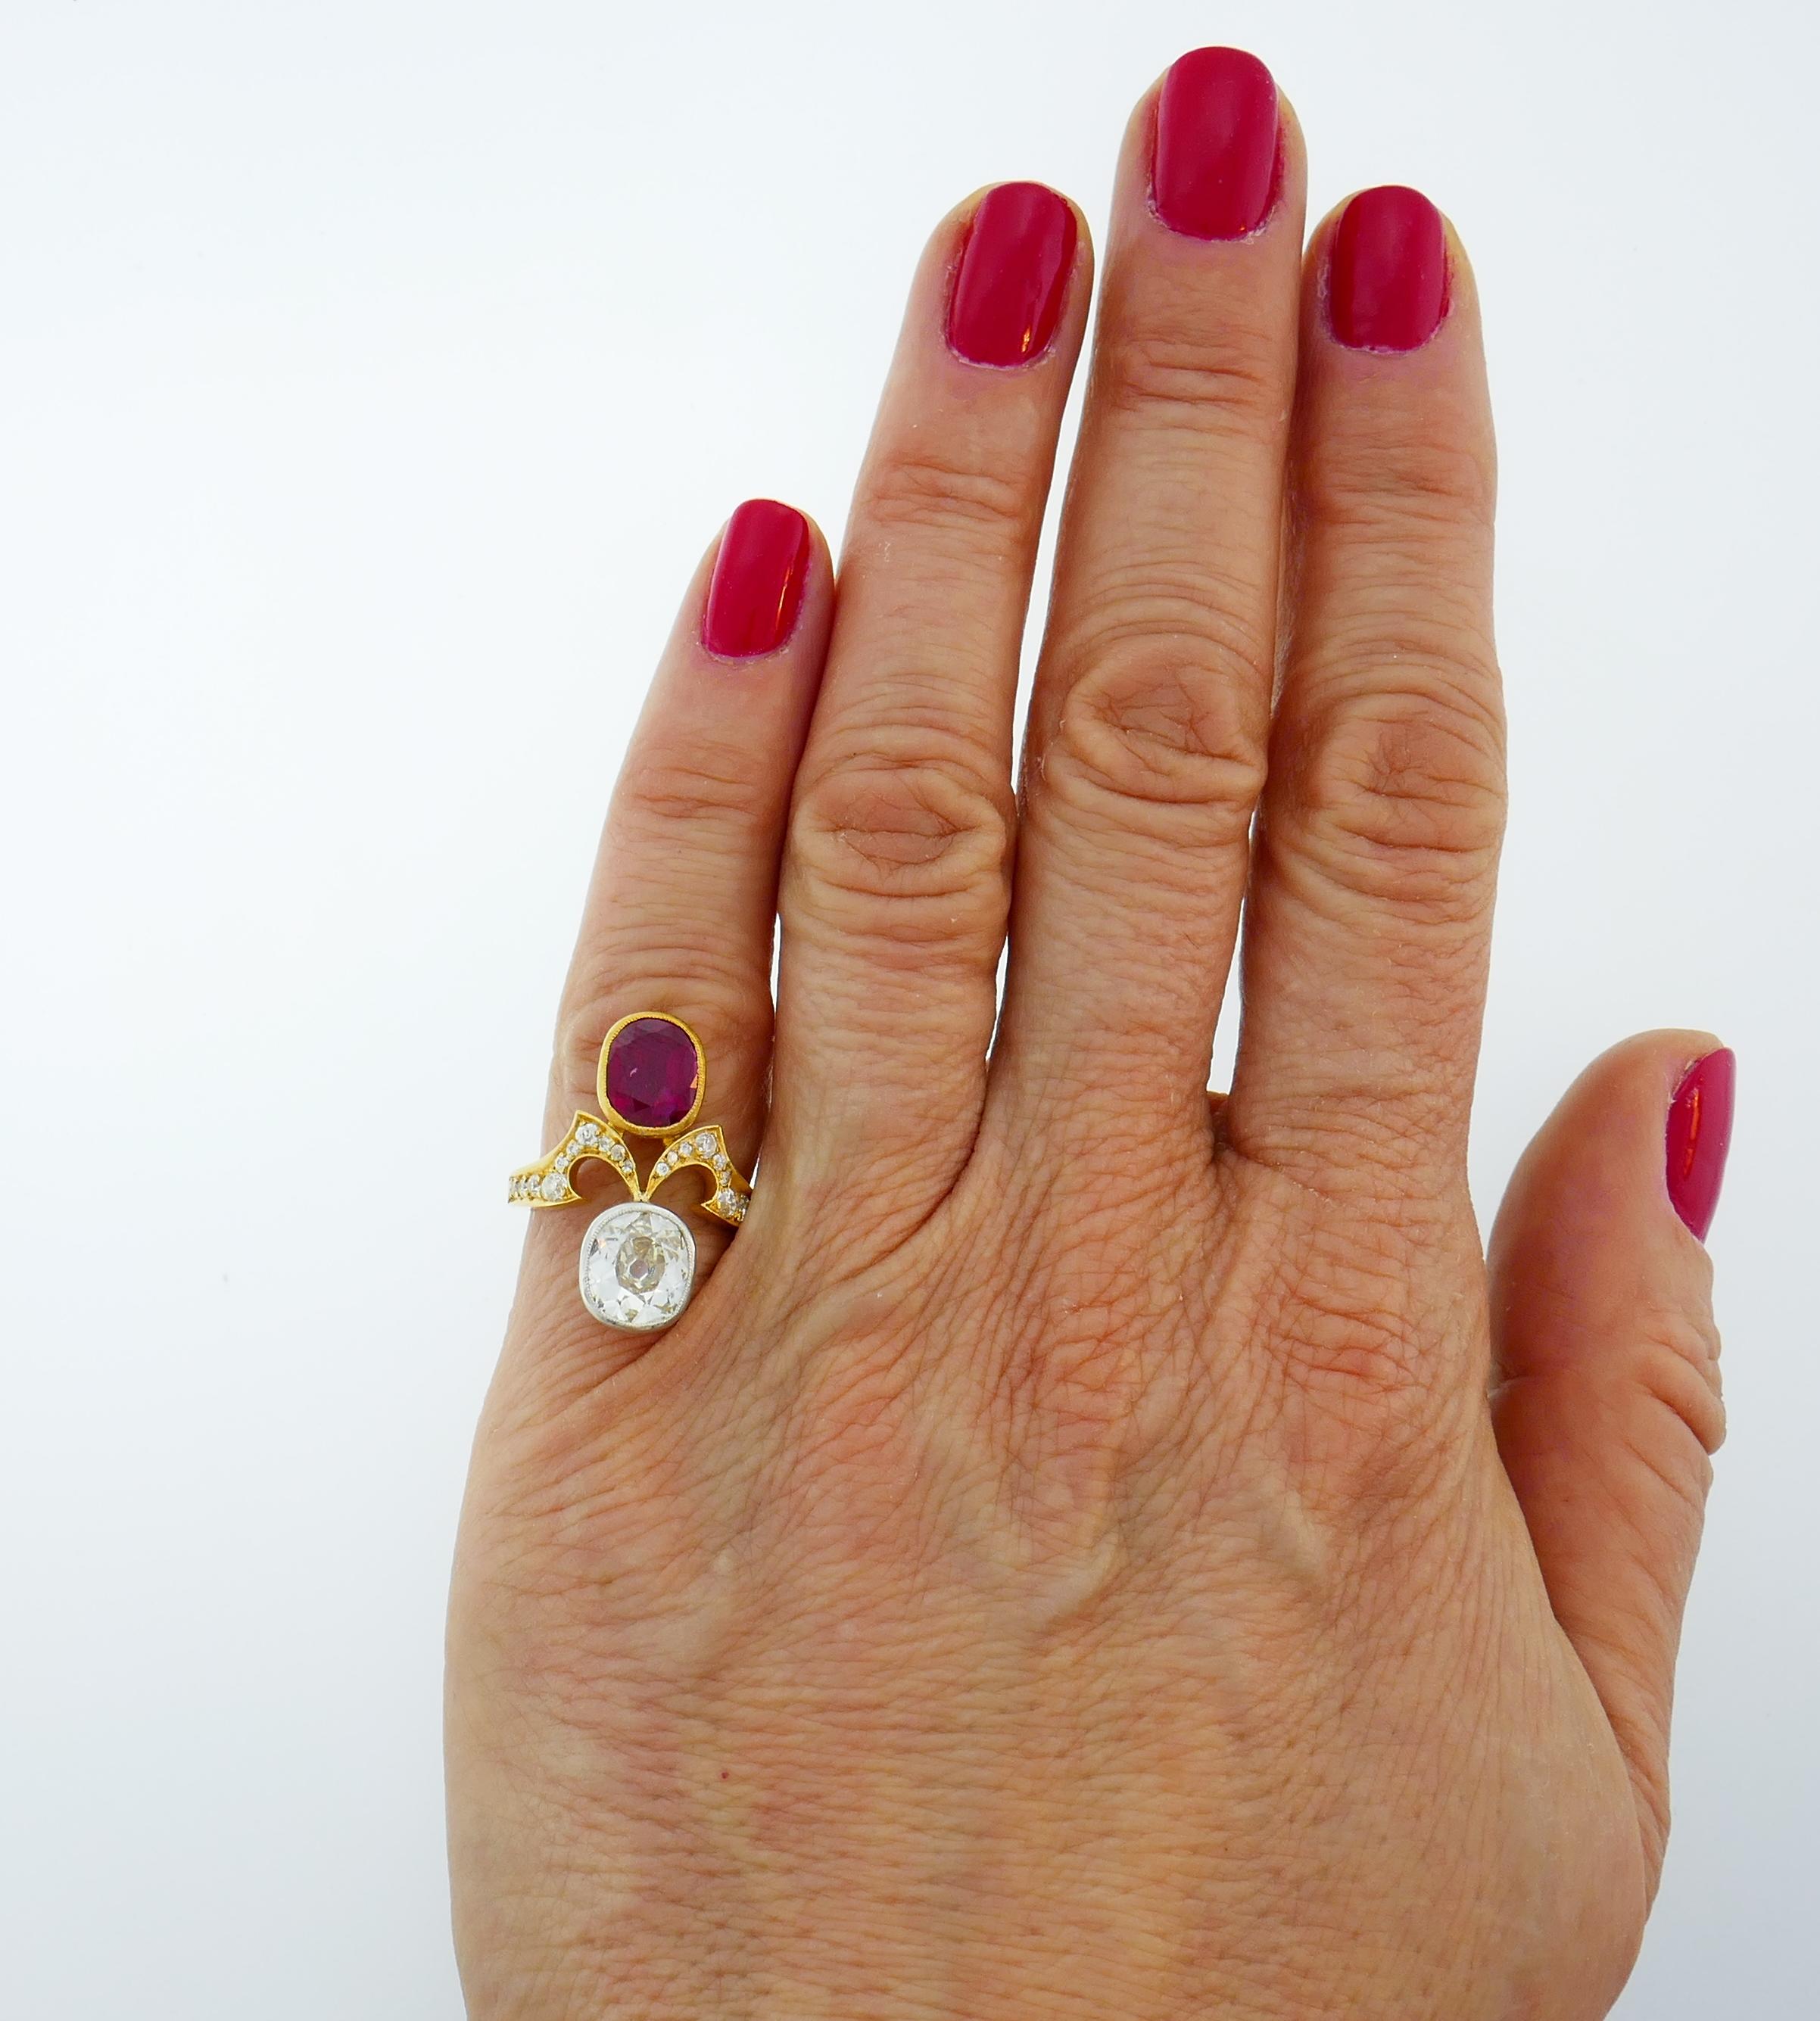 Classic Toi et Moi Victorian ring. Elegant, timeless, feminine and wearable, the ring is a great addition to your jewelry collection.
Made of 18 karat yellow gold (stamped and tested), the ring features a hand-faceted old cushion cut ruby and